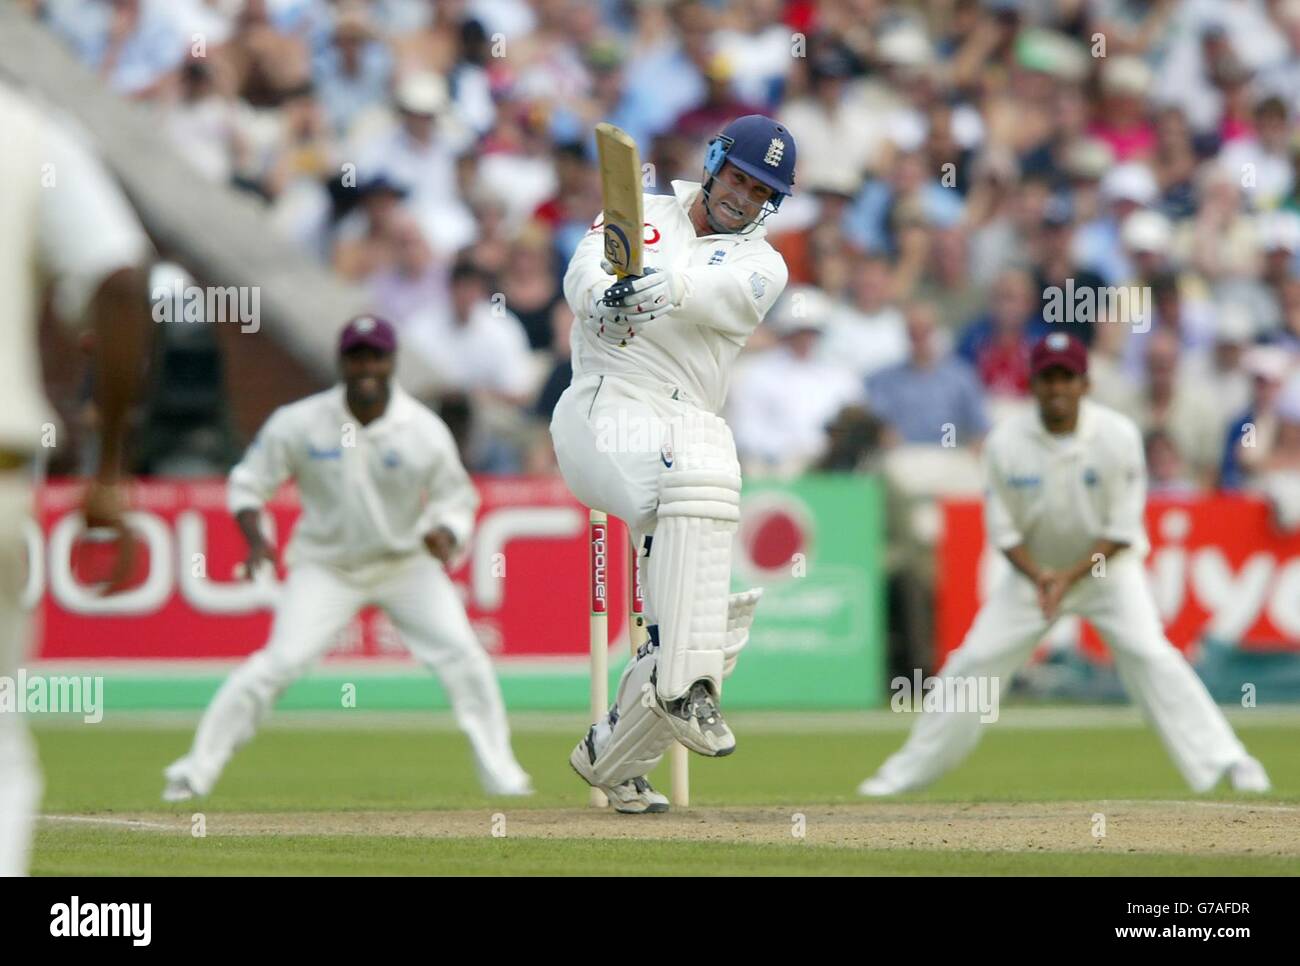 England's Graham Thorpe (centre) hits a boundary against the West Indies during the third day of their third npower test at Old Trafford, Manchester. Stock Photo